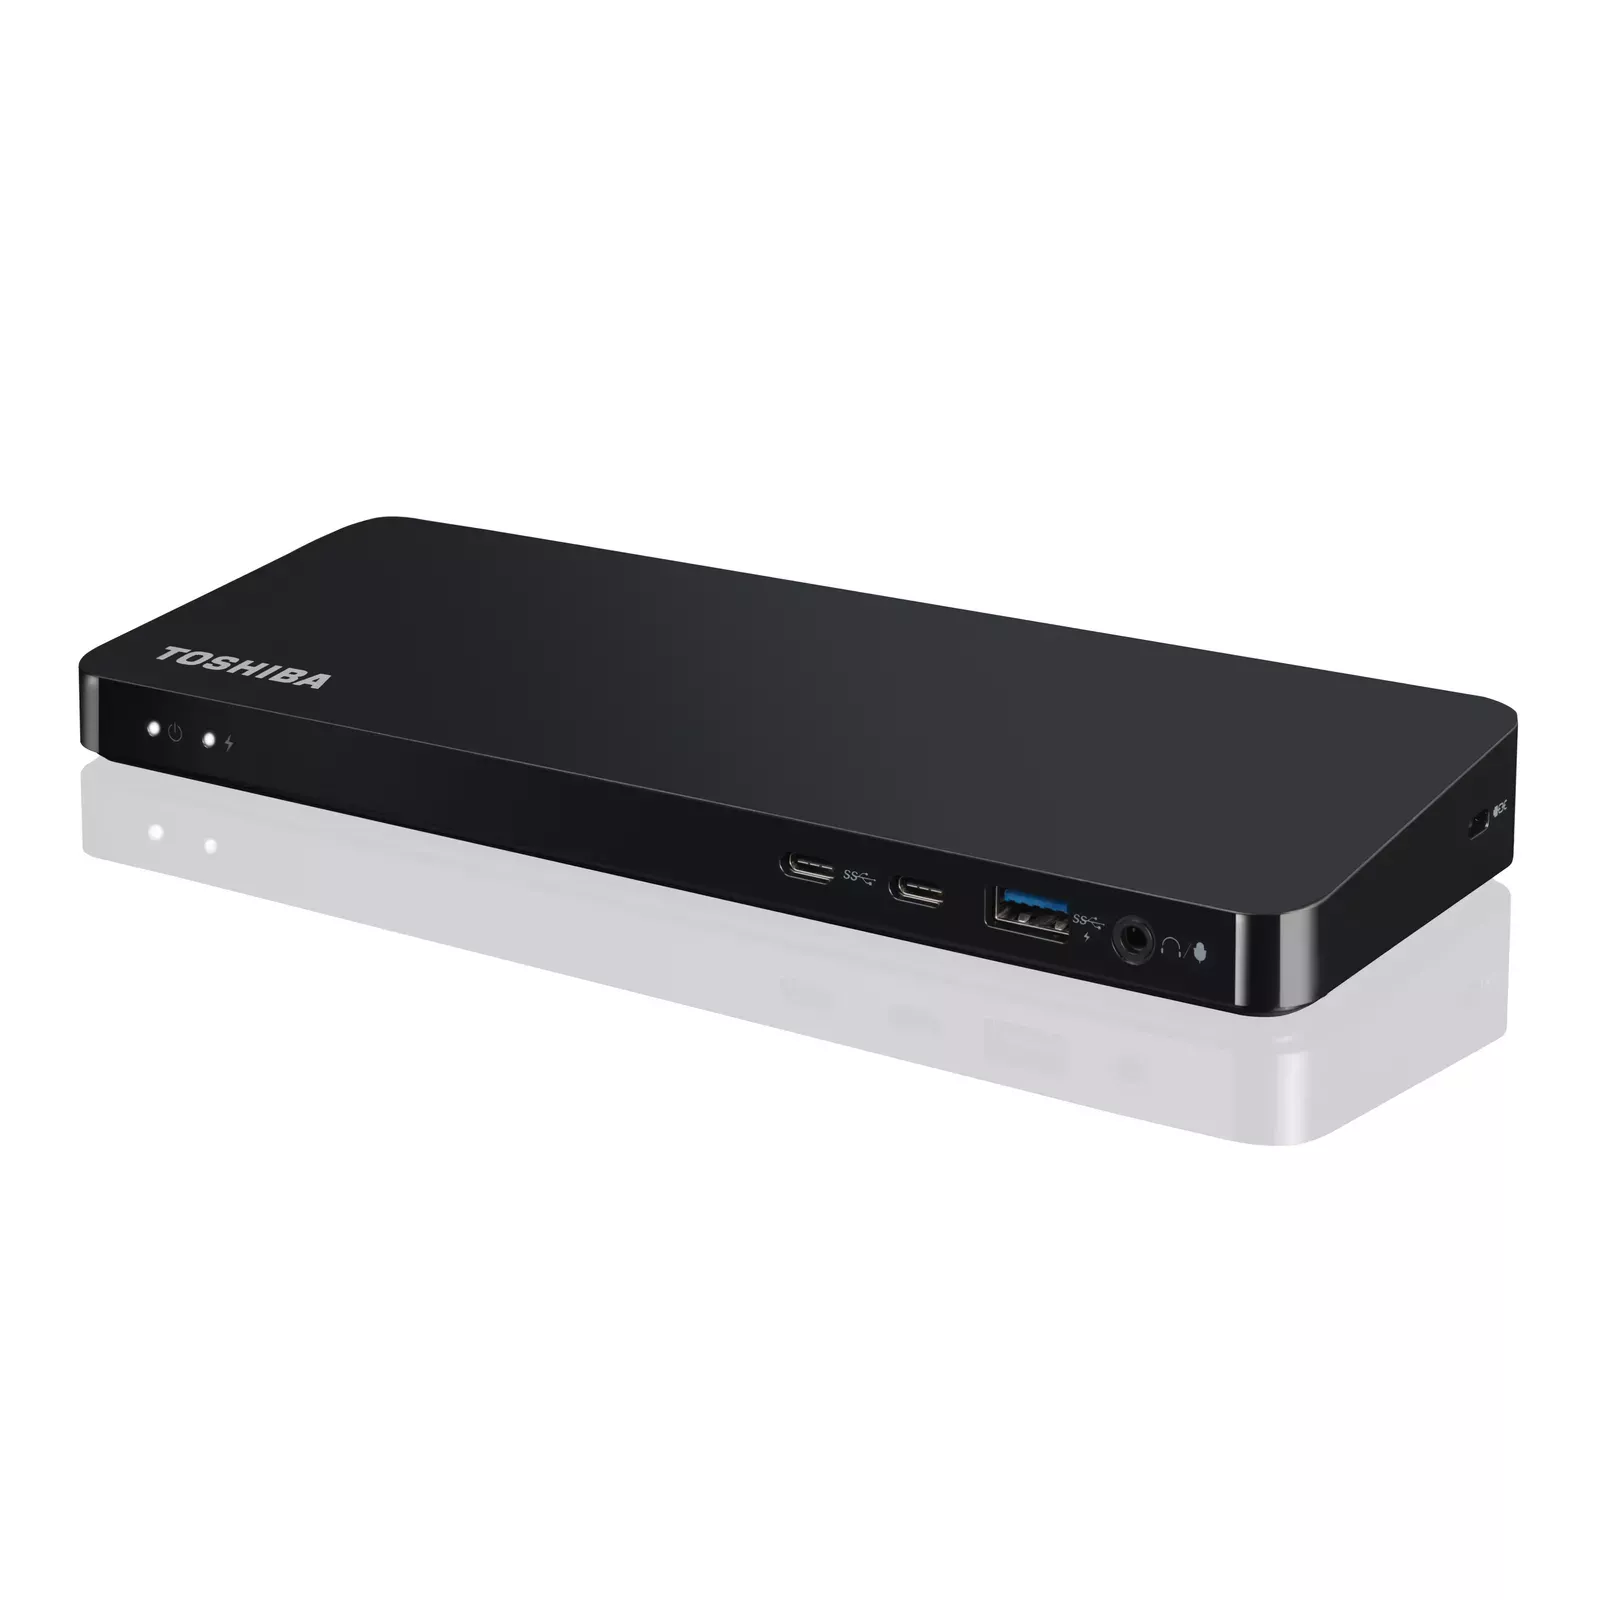 Dynabook Thunderbolt 4 Dock - Function Overview